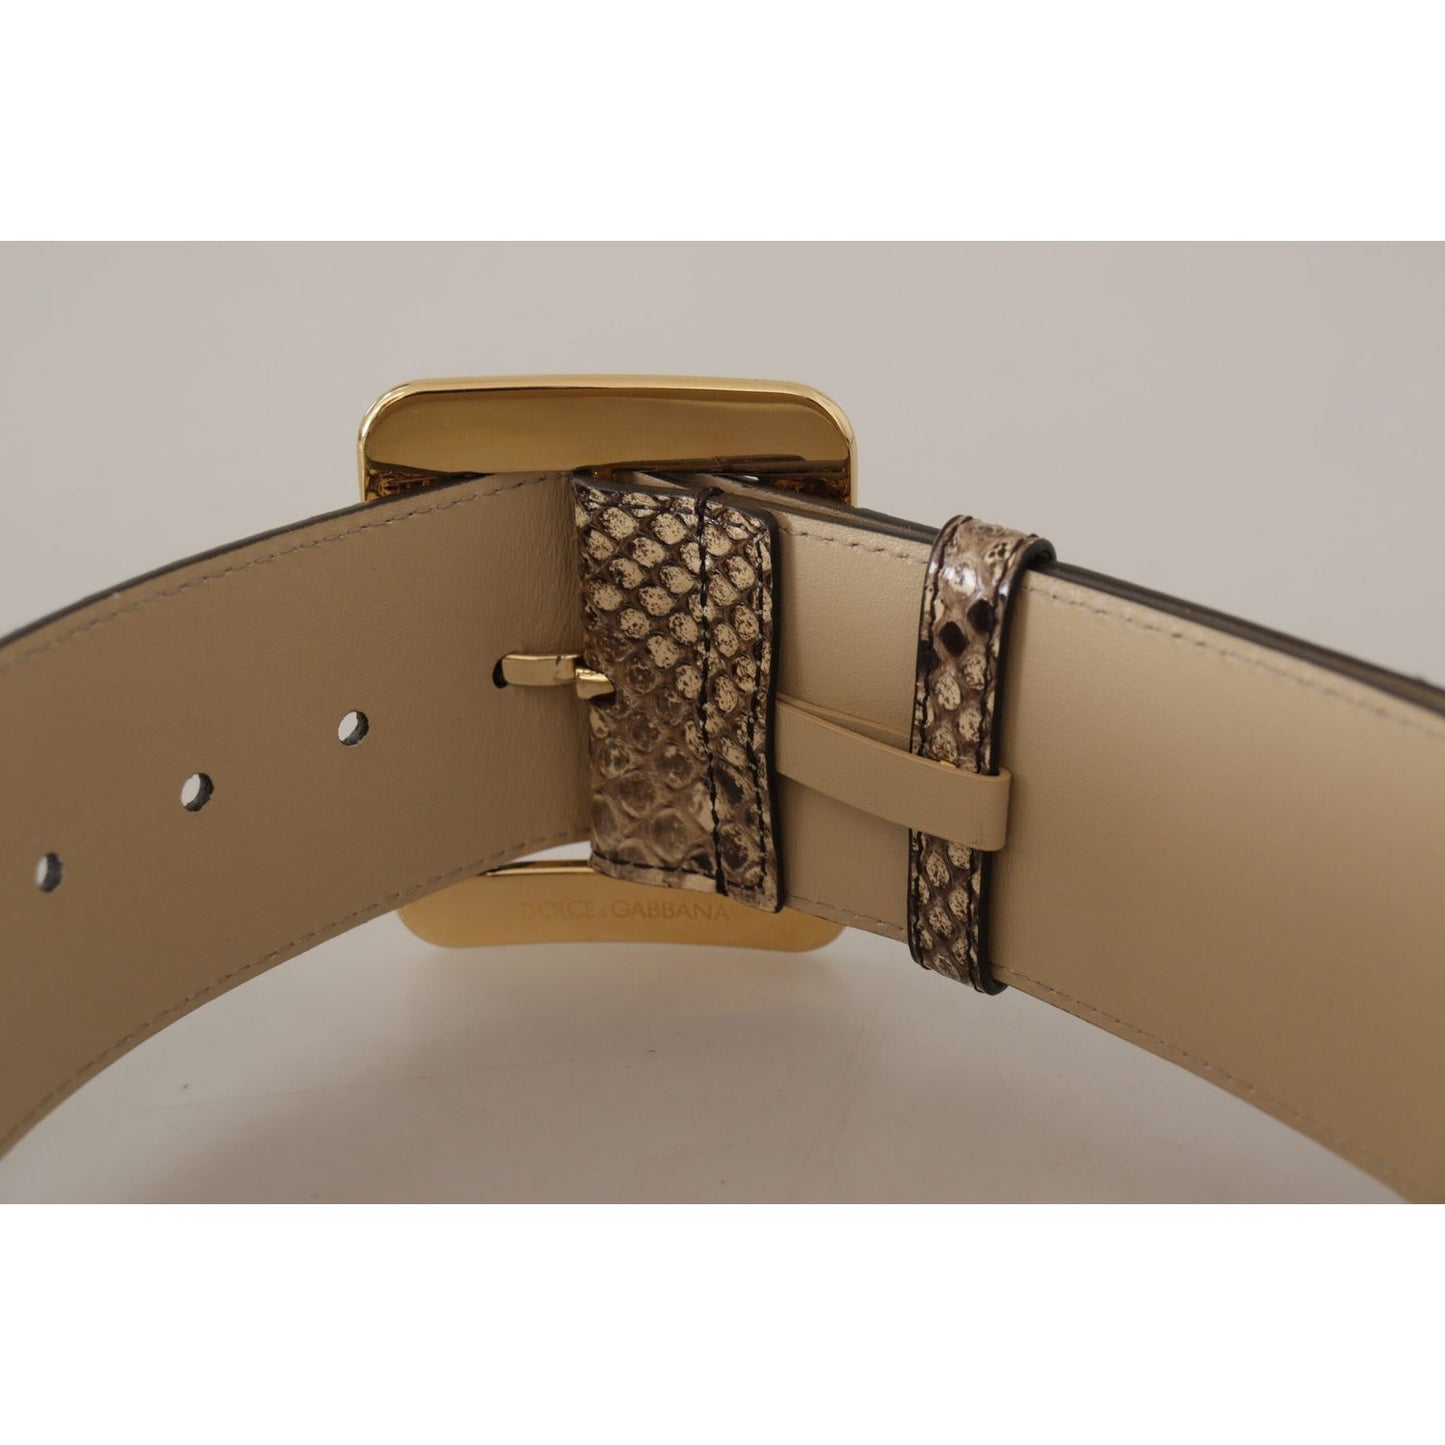 Dolce & Gabbana Brown Exotic Wide Waist Leather Gold Metal Buckle Belt brown-exotic-wide-waist-leather-gold-metal-buckle-belt IMG_9050-1-scaled-767632c1-f89.jpg